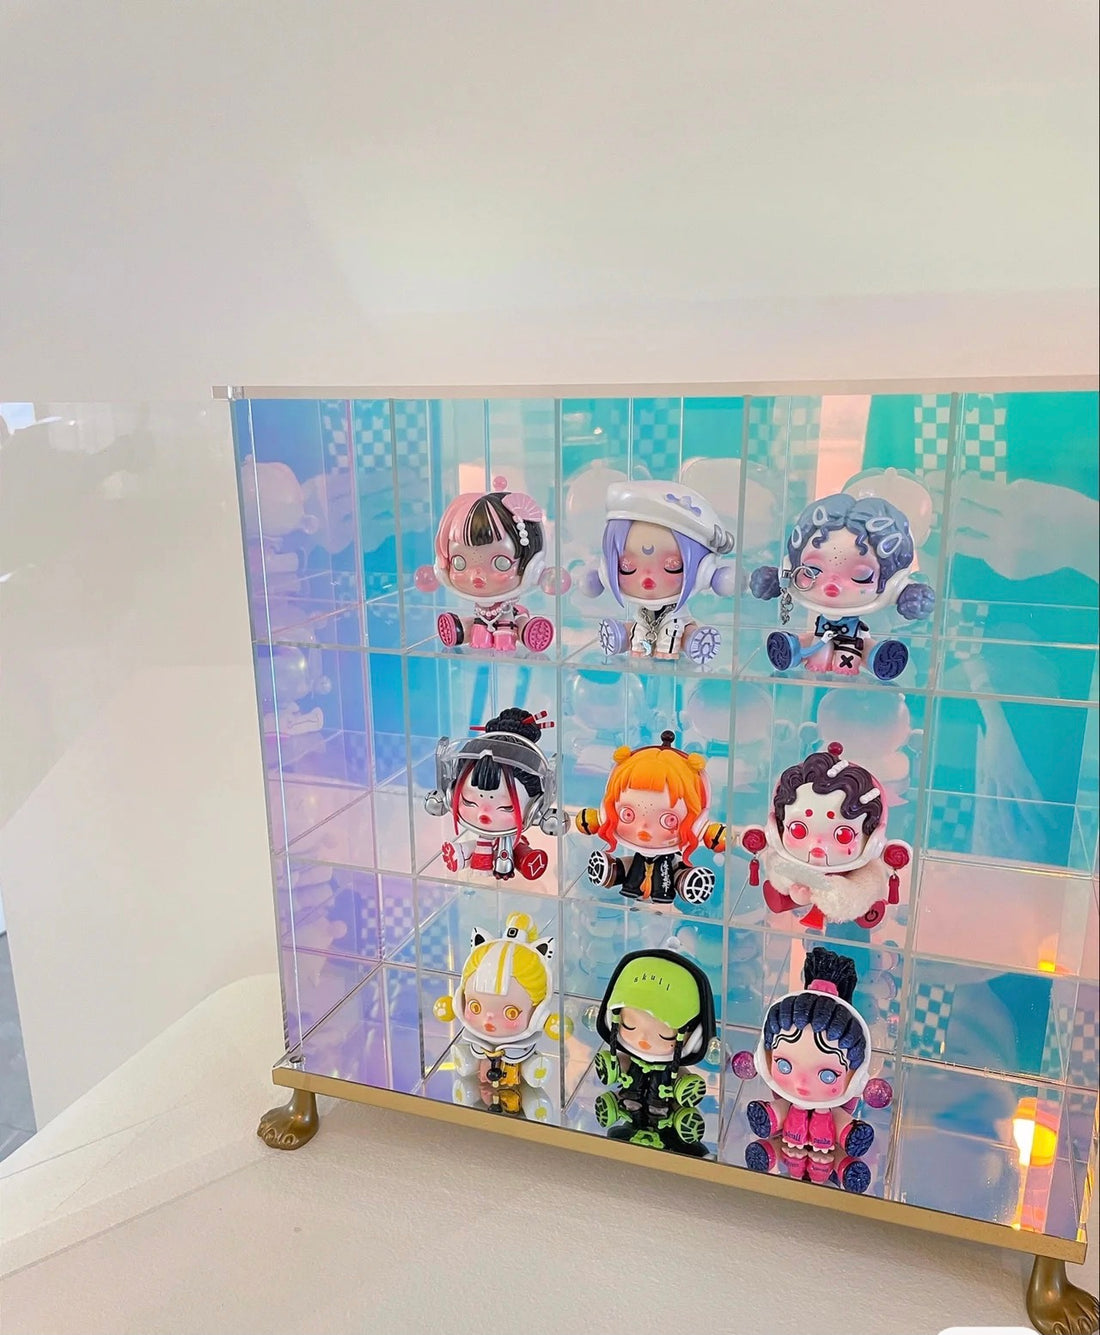 2022 Newest TOP 7 popular Acrylic Display Shelf Risers for Pop Figures